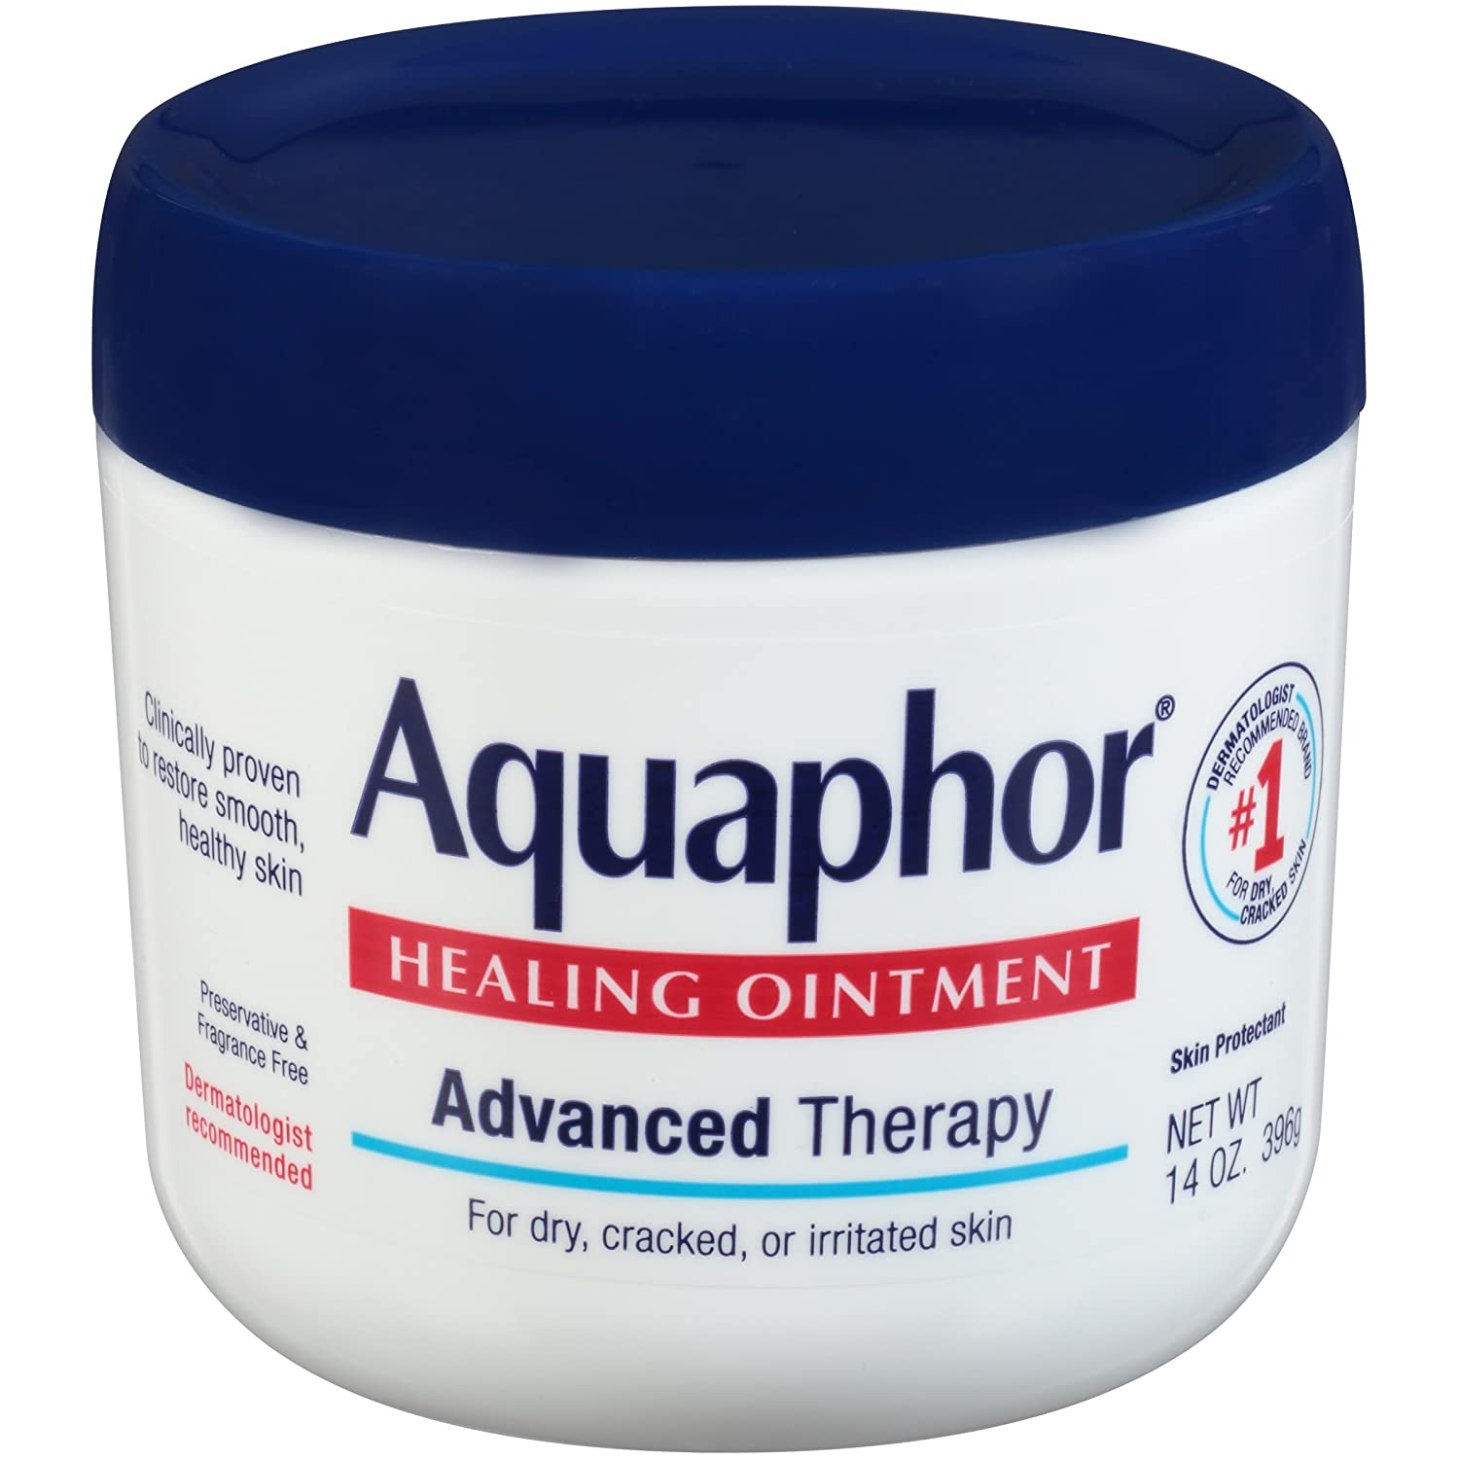 Aquaphor Healing Ointment, dermatologist's favorite skin-care products